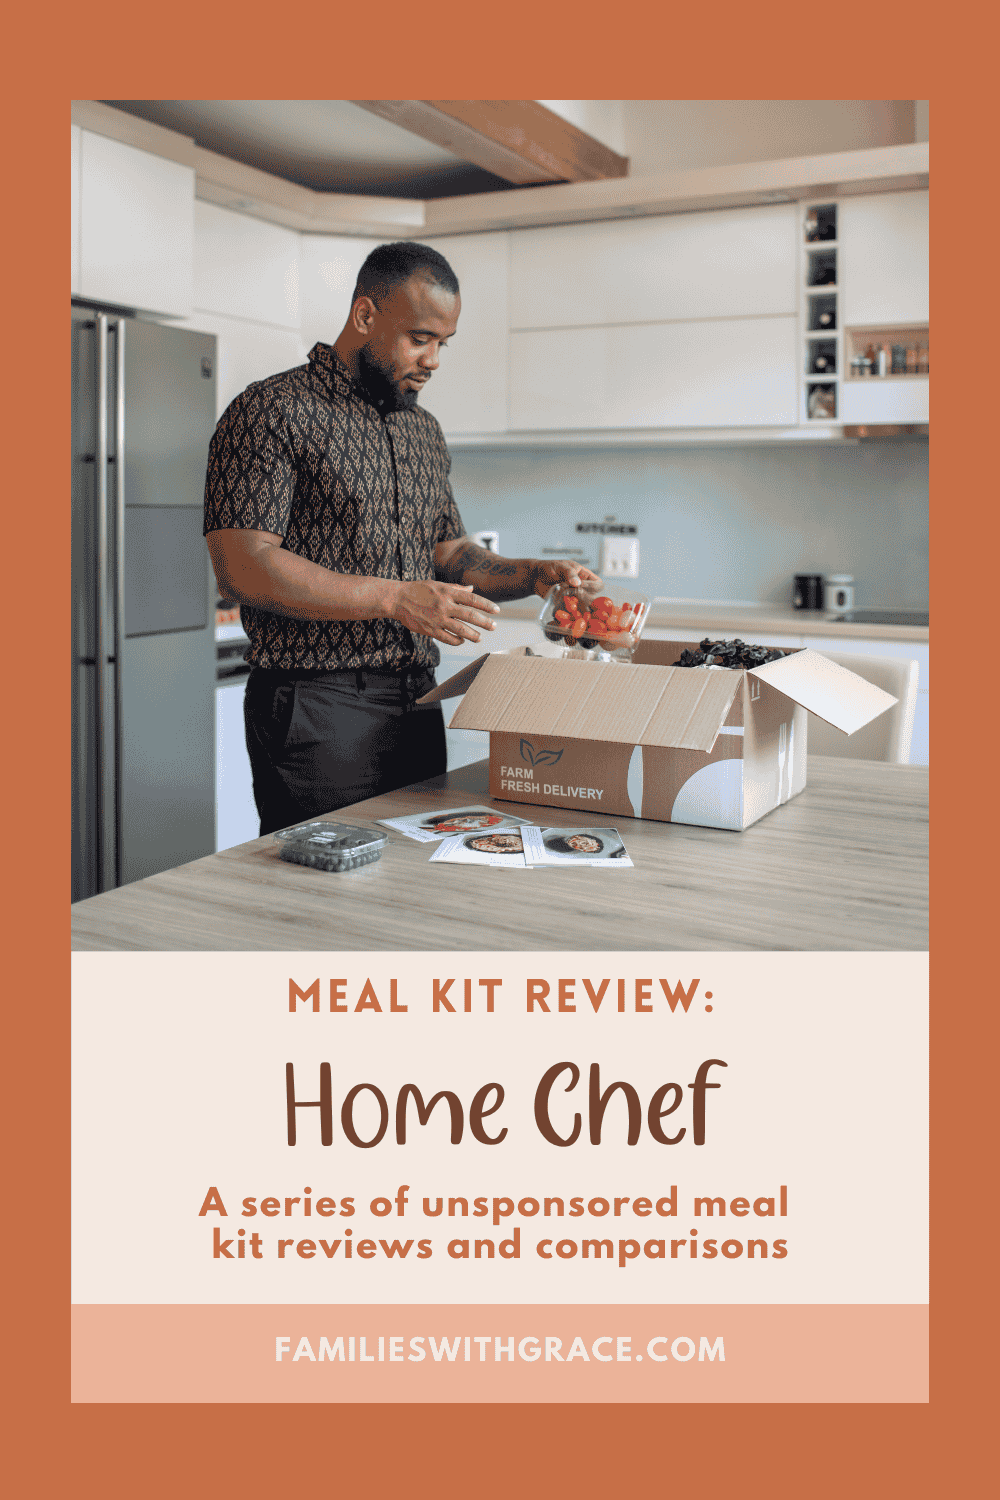 Meal kit review: Home Chef